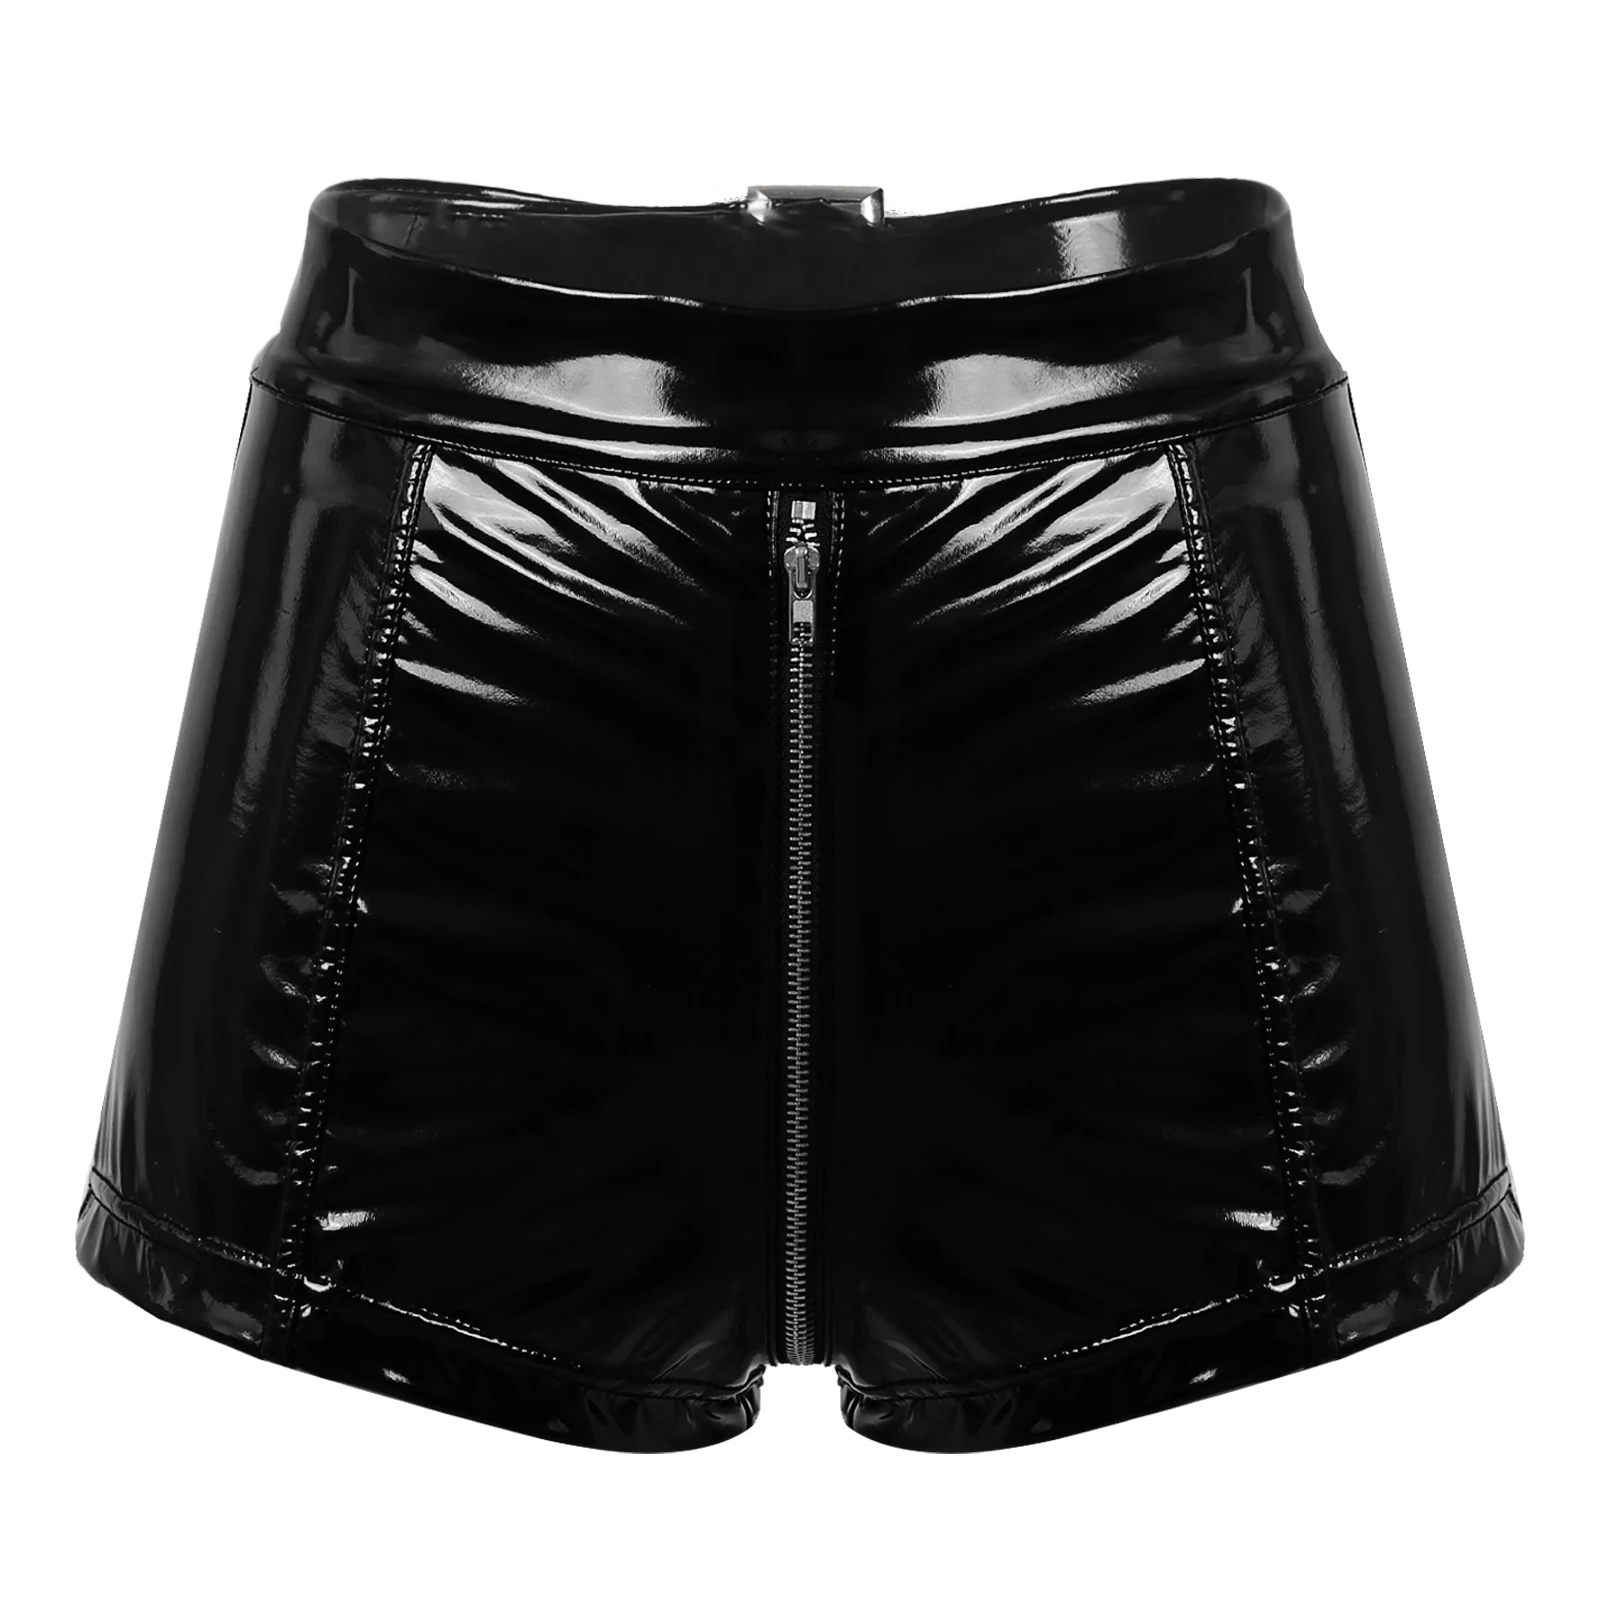 

Women Female Hot Shorts Patent Leather Booty Shorts Clubwear for Pole Dancing Low Waist Sexy Club Zipper Crotch Rave Mini Shorts